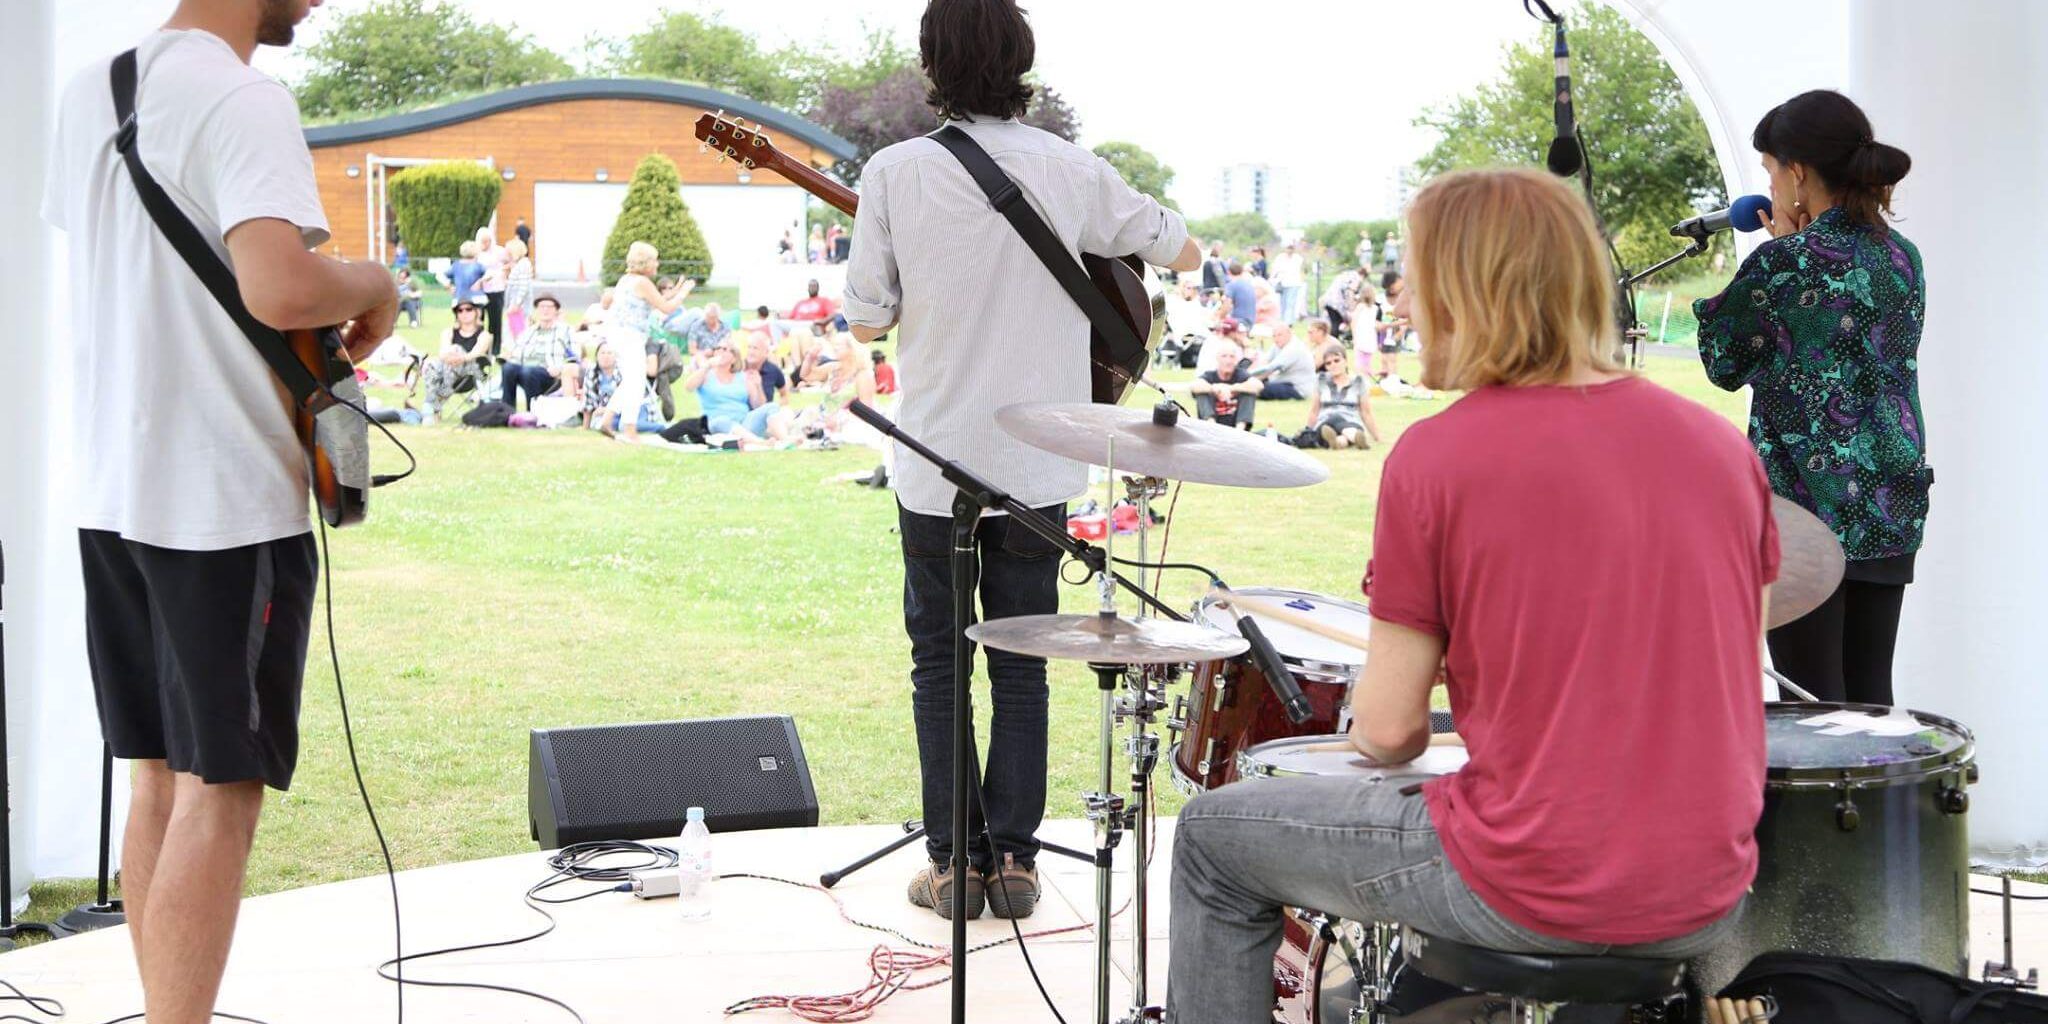 Band playing at outdoor event